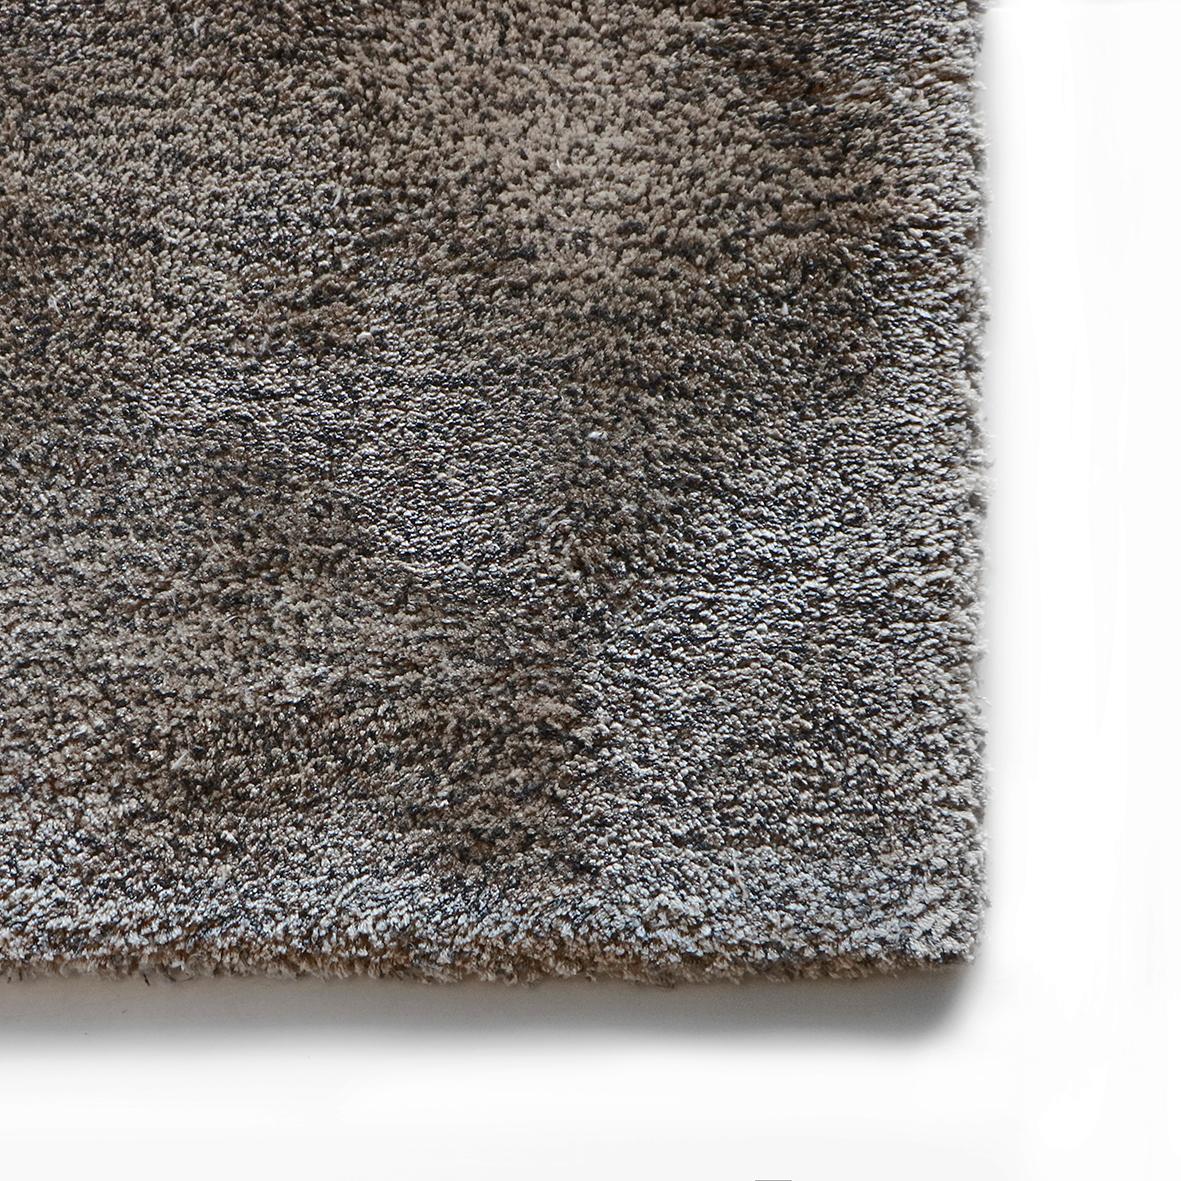 Hand-Woven 21st Cent Elegant Eco-Friendly Grey Rug by Deanna Comellini 250x260 cm For Sale